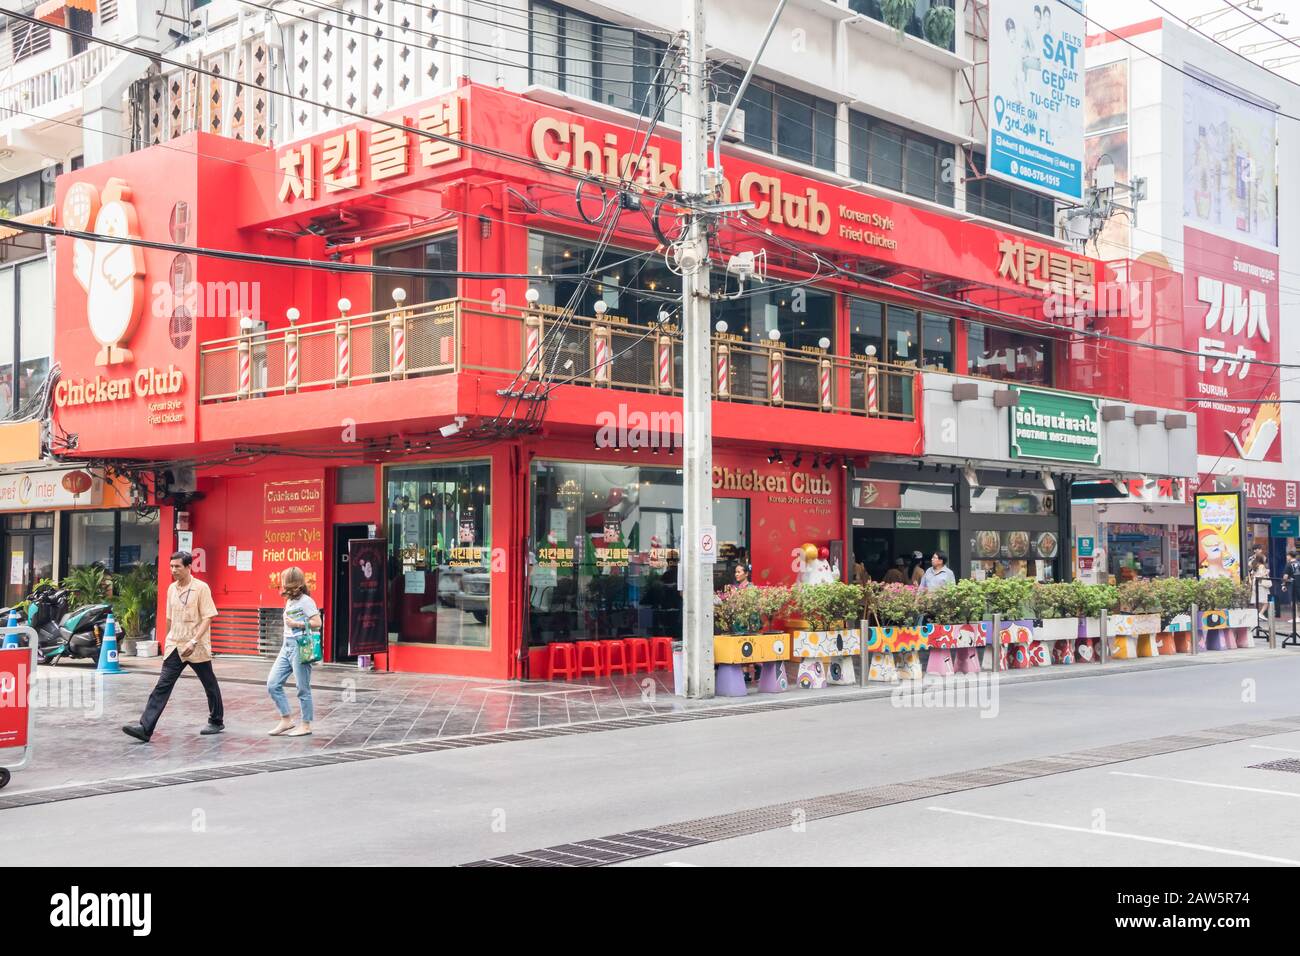 Bangkok, Thailand - January 10th 2020: The Chicken CLub restaurant in Siam Square. This is a trendy shopping area. Stock Photo